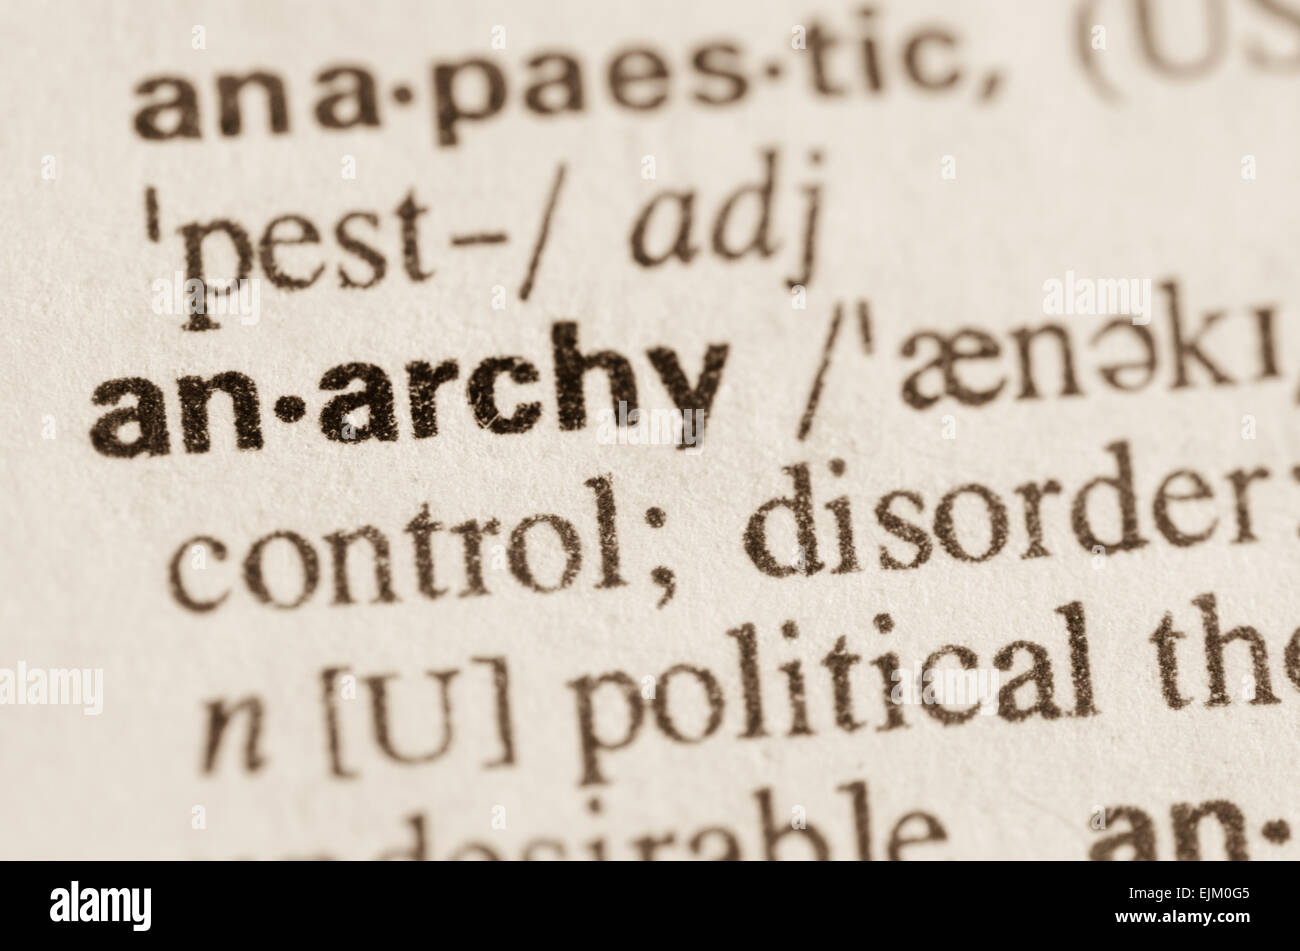 Definition of word anarchy in dictionary Stock Photo